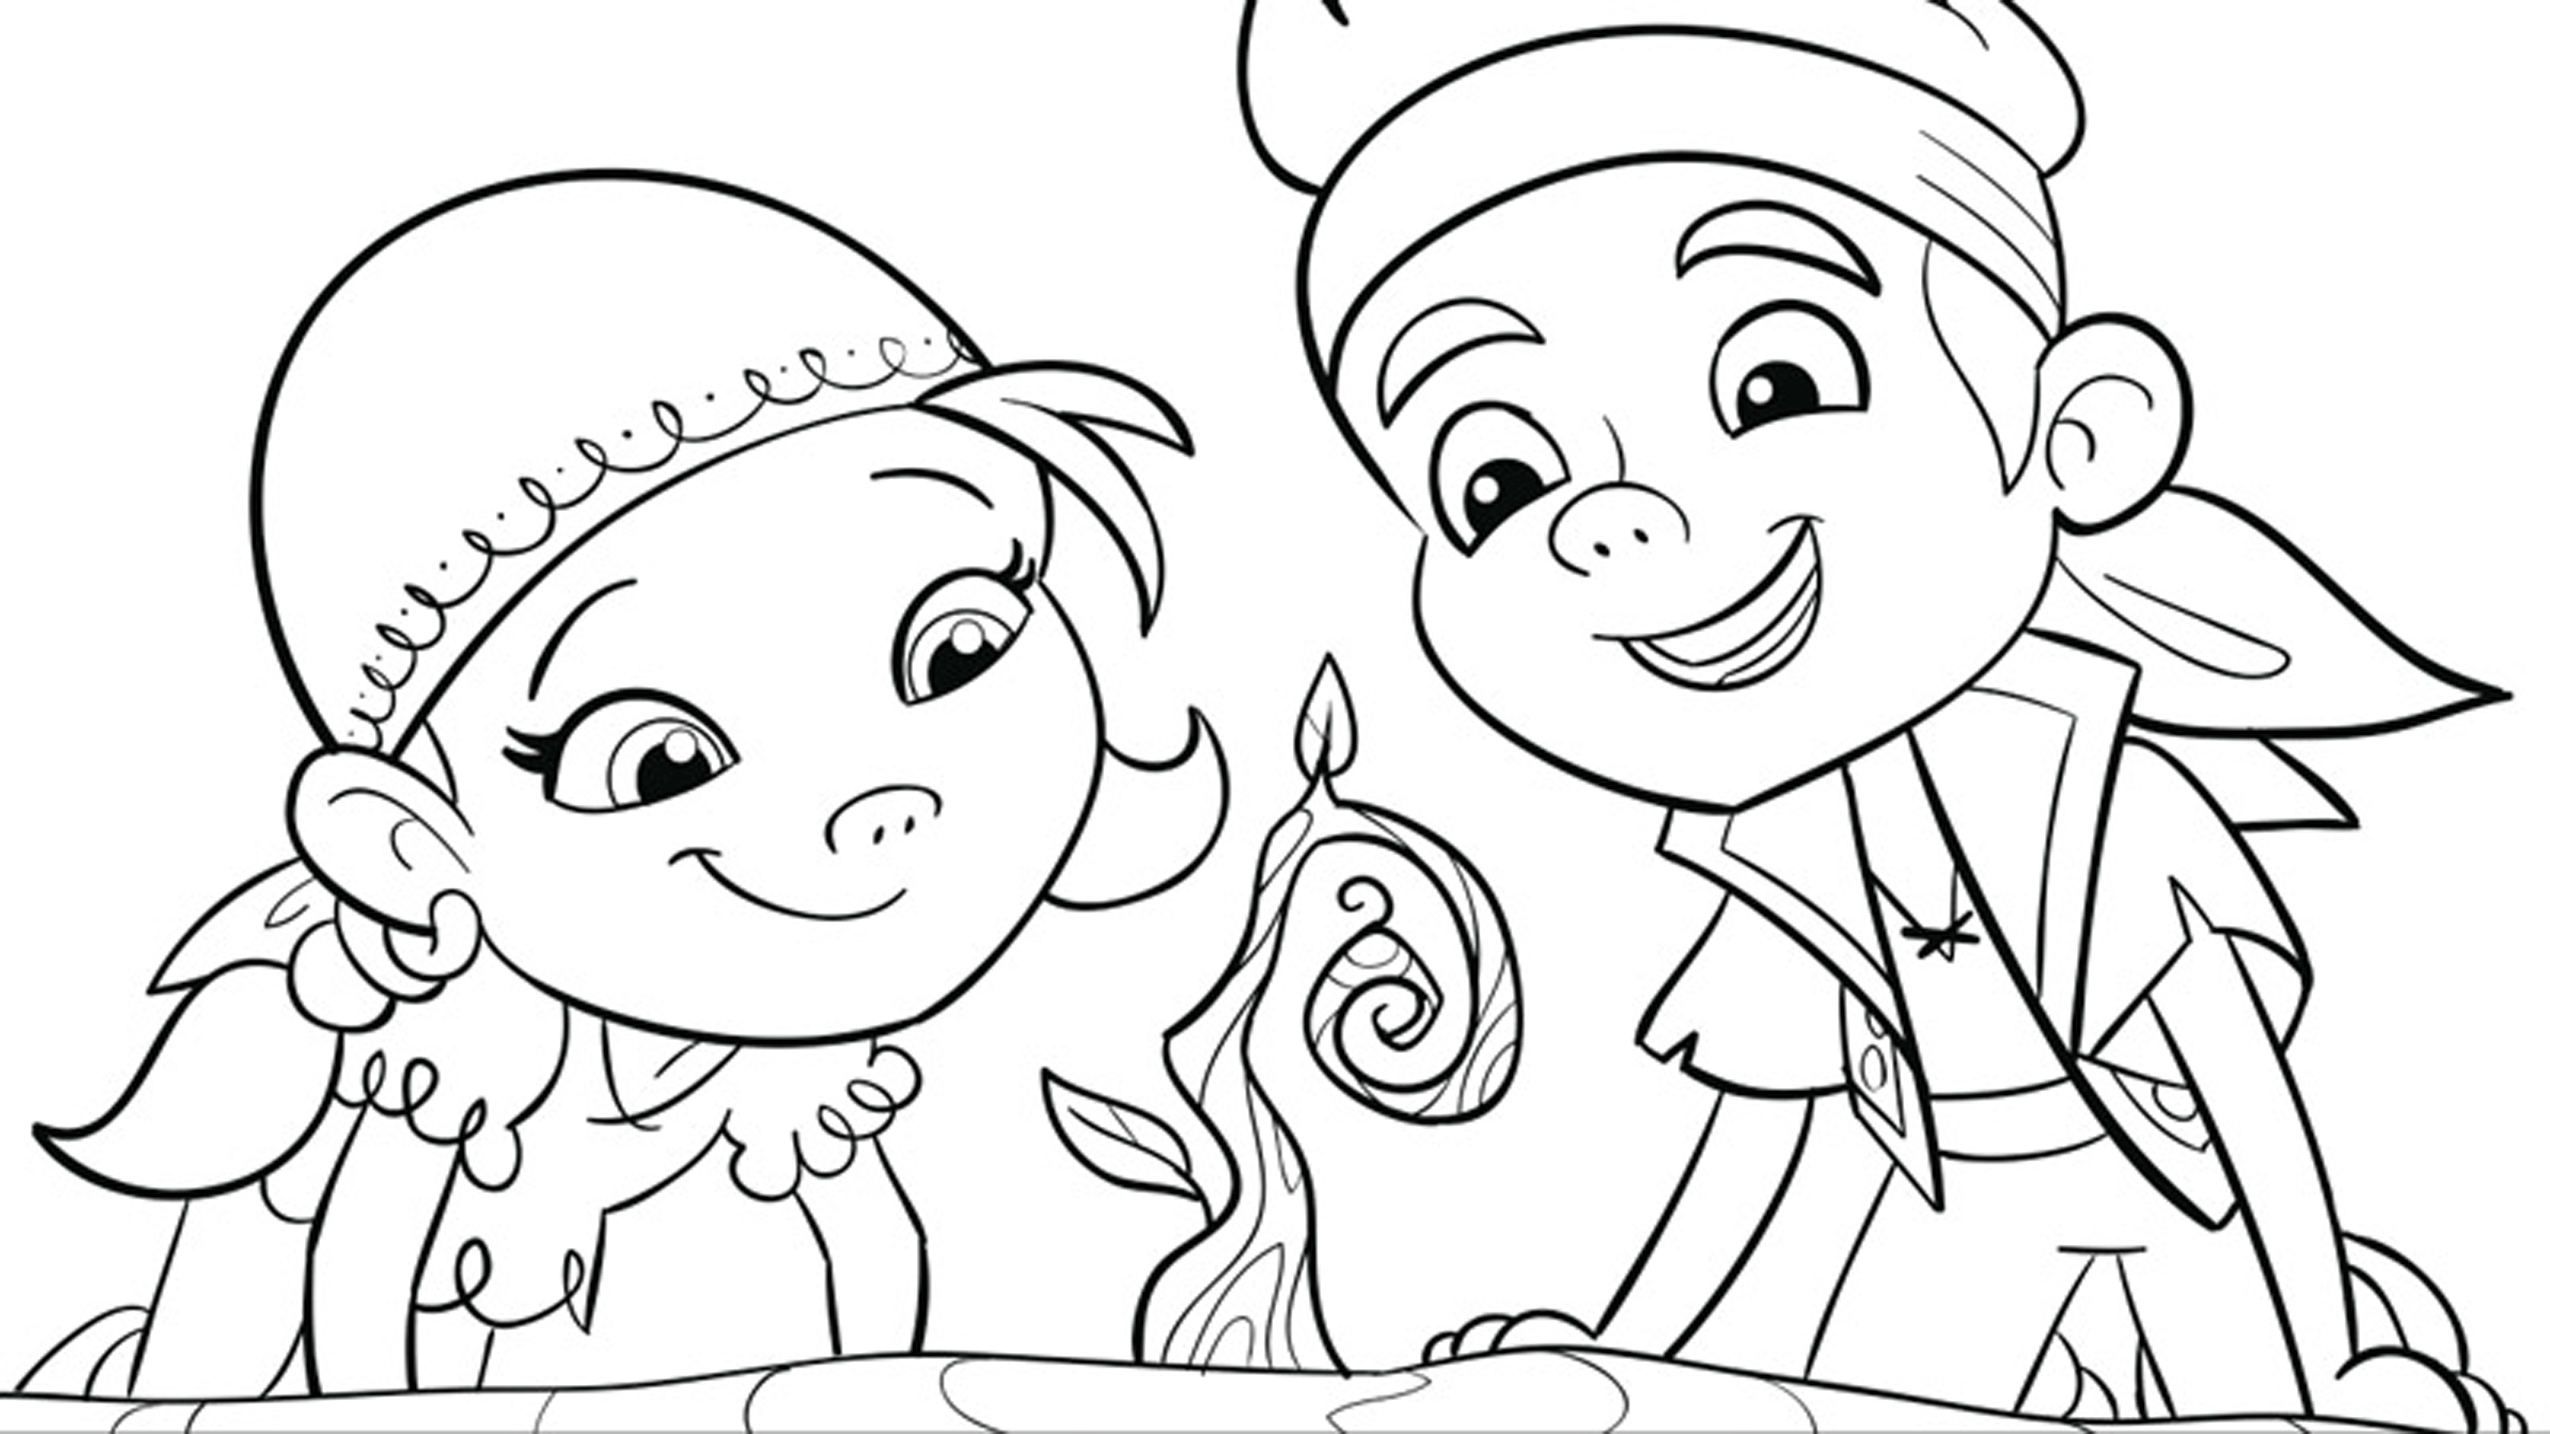 Disney Christmas Coloring Pages For Kids Printable ...